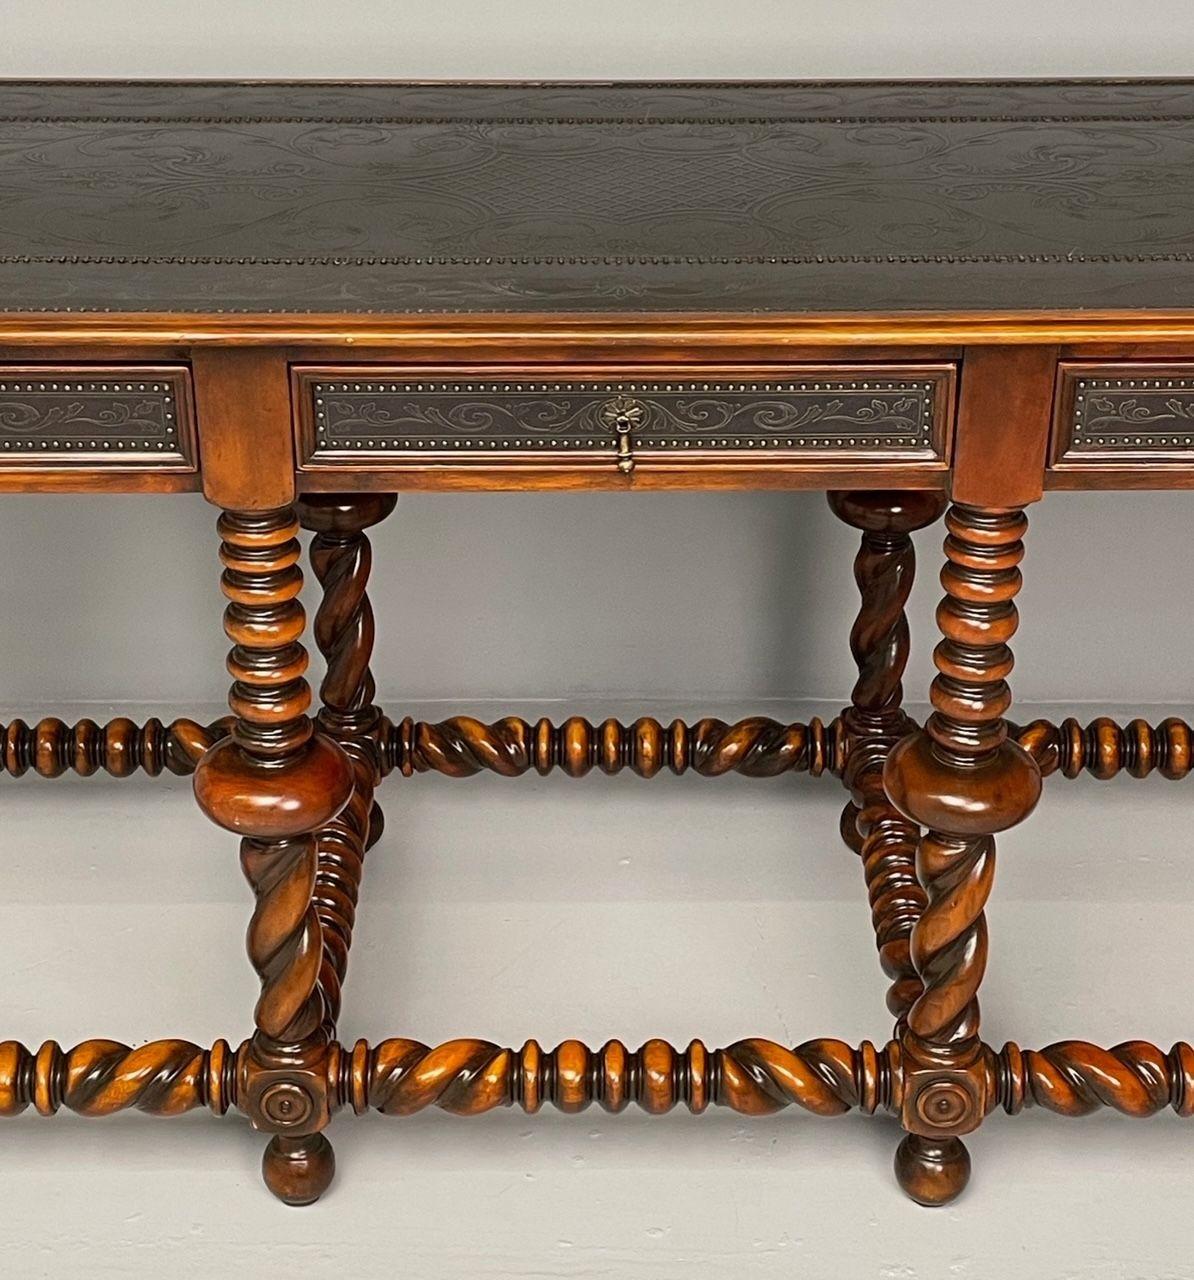 Baroque, Barley Twist Console, Turned Wood, Gray Etched Metal, USA, 2000s For Sale 4